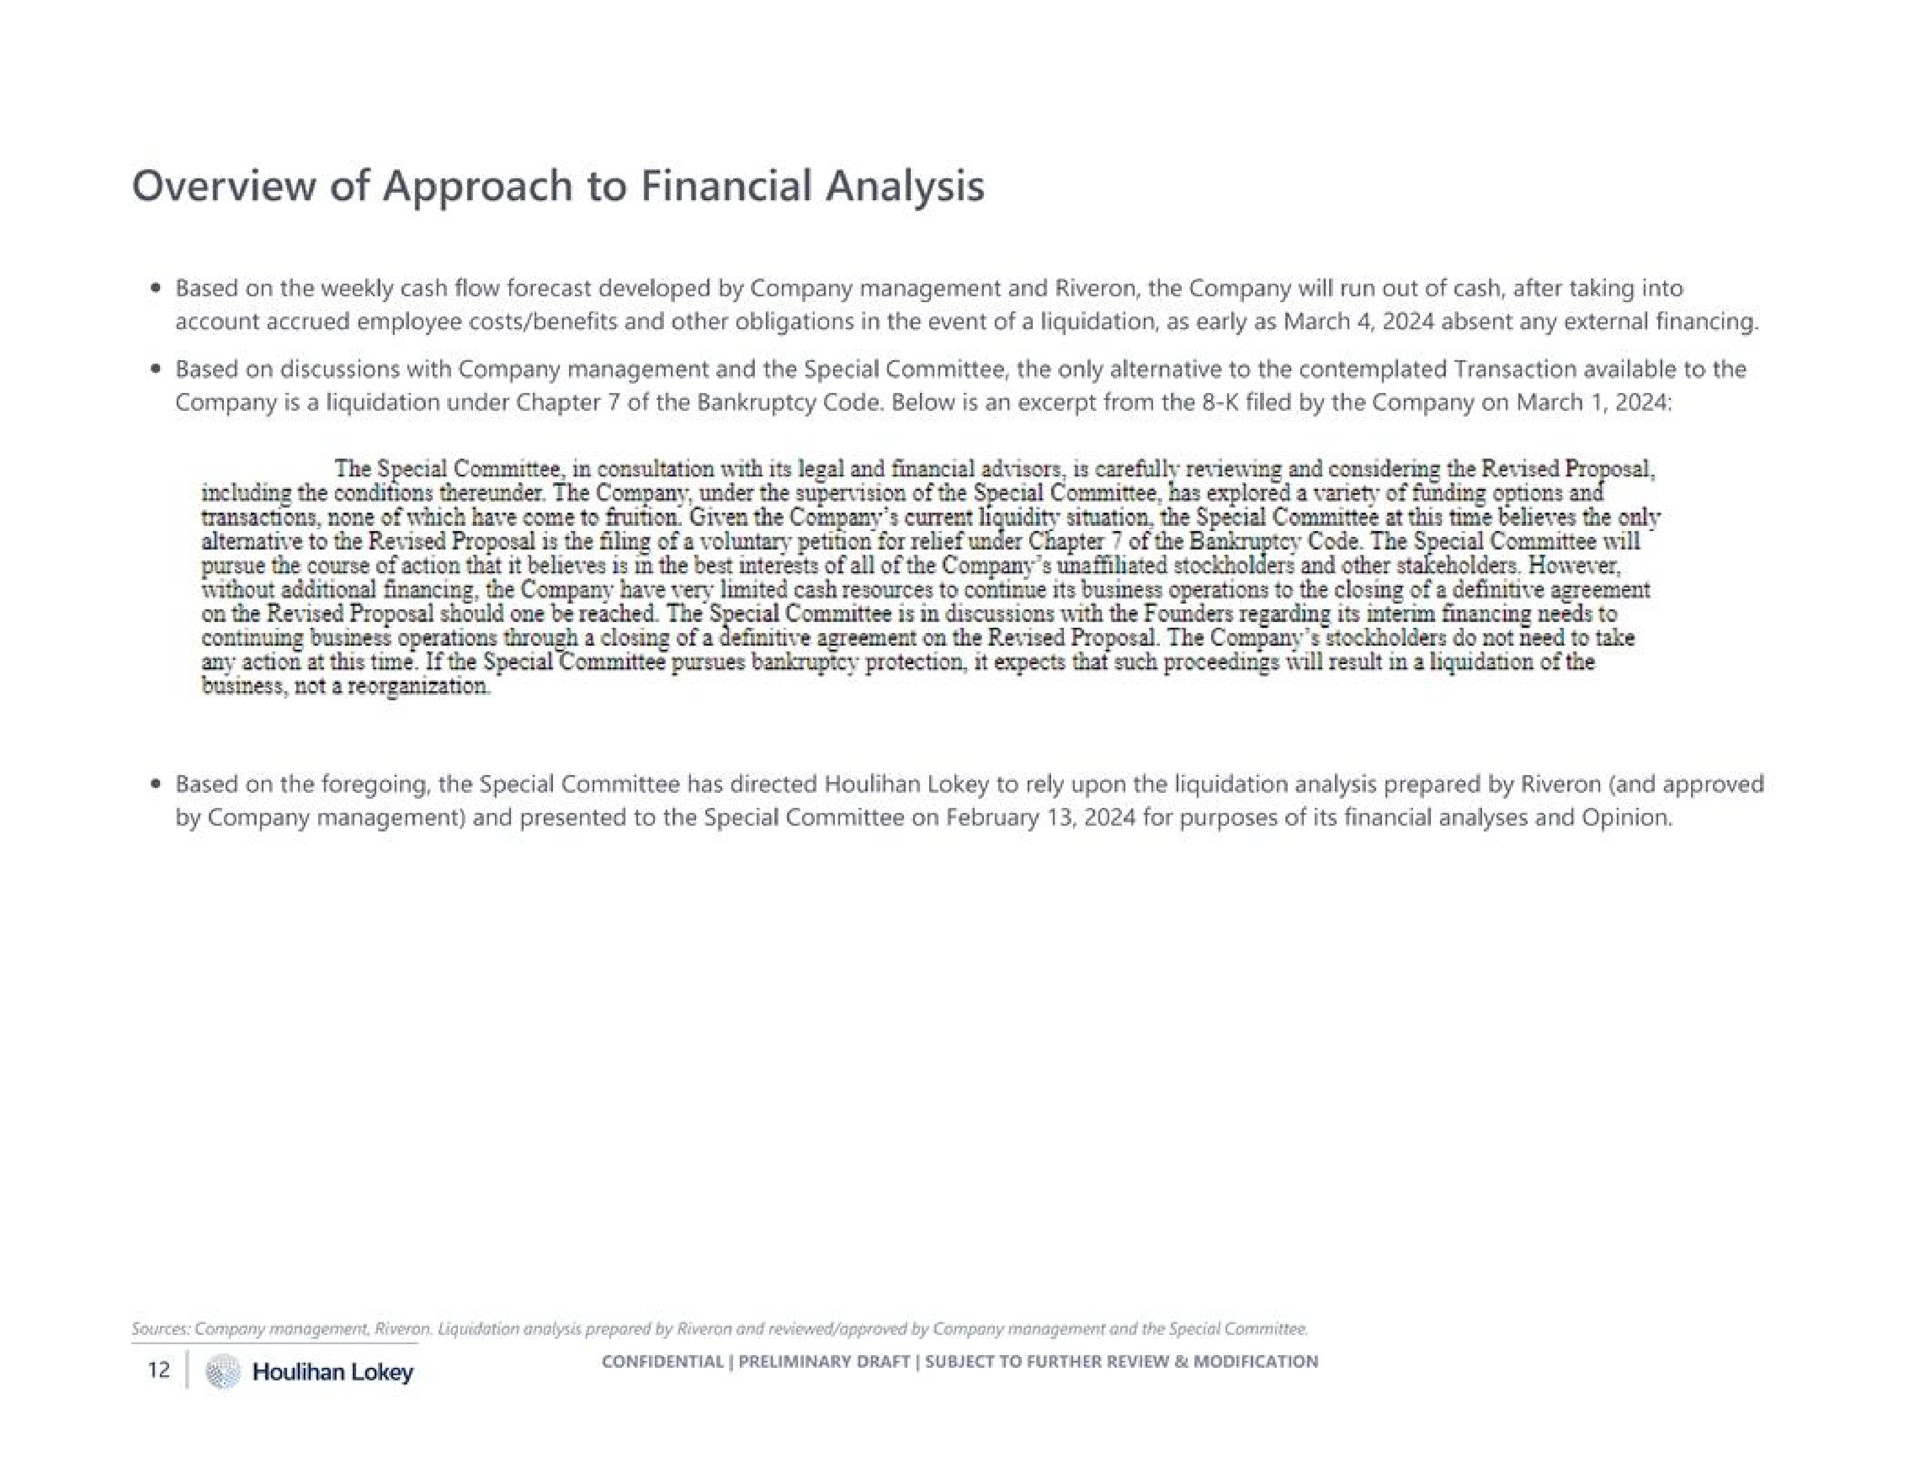 overview of approach to financial analysis | Houlihan Lokey